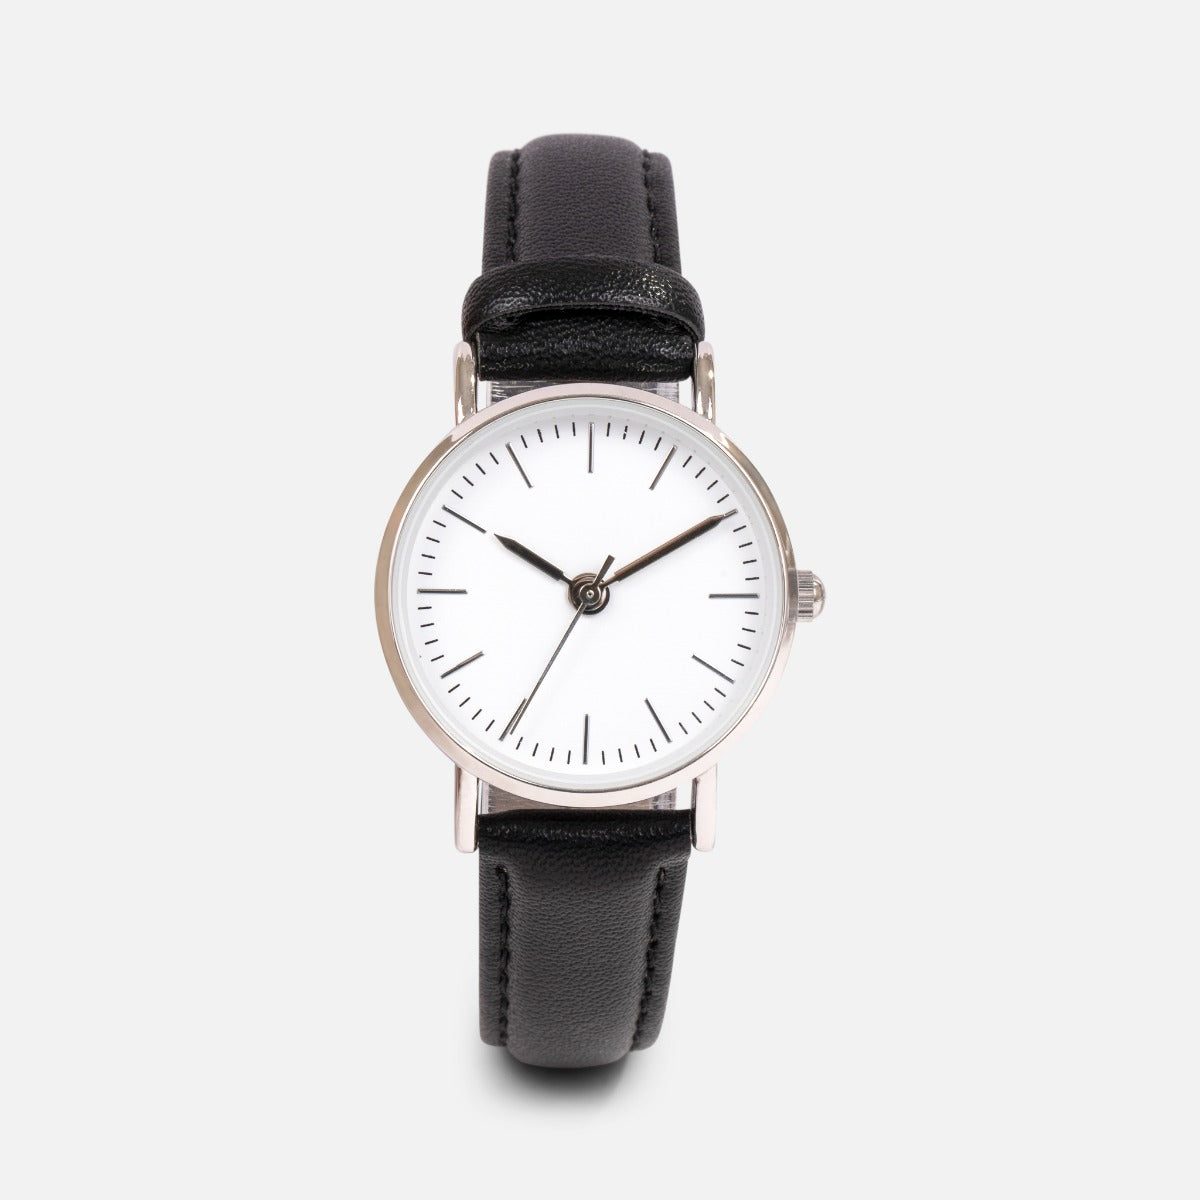 Unik collection - black watch with white dial